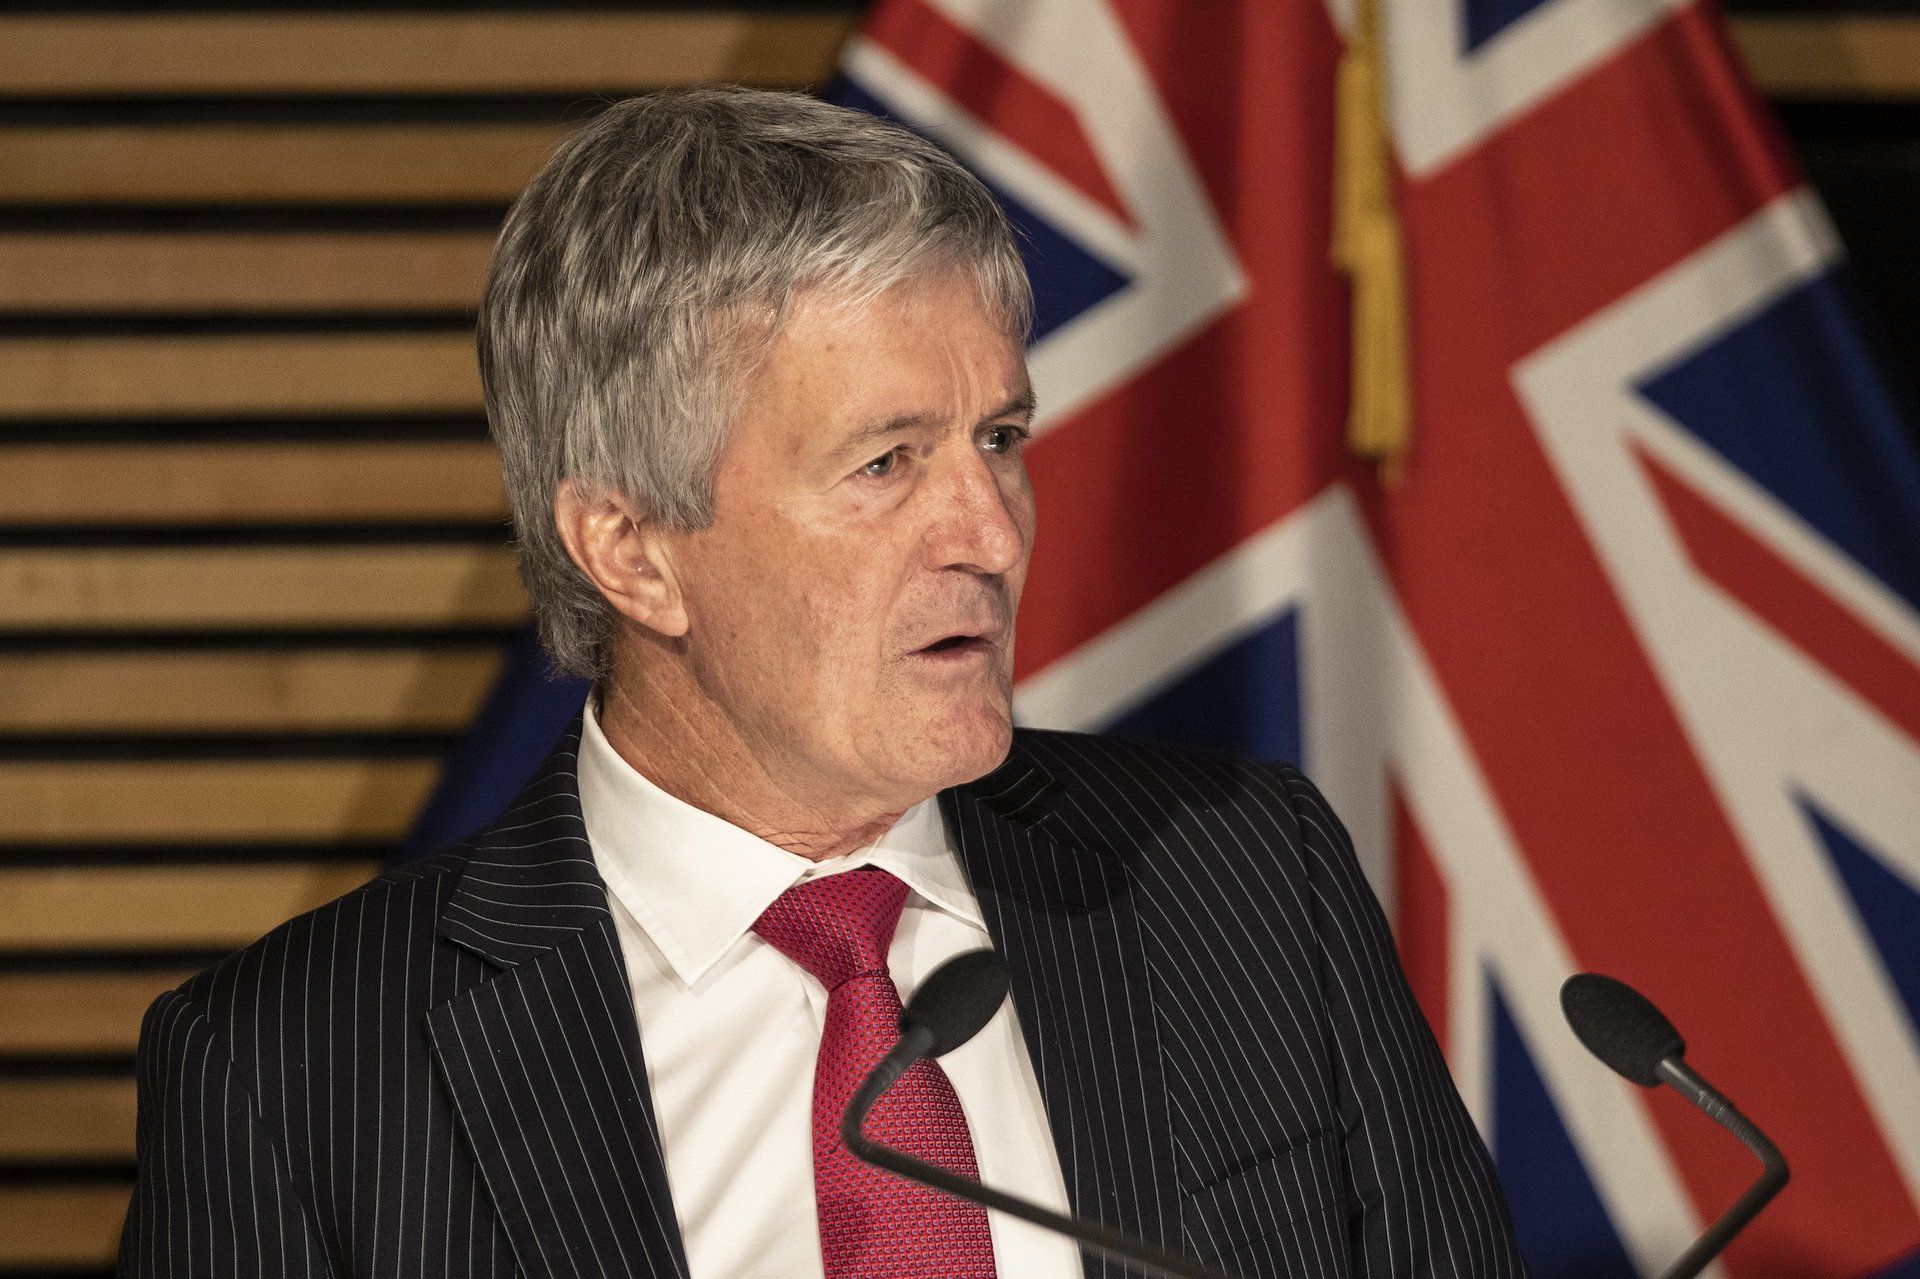 New Zealand's Minister for Trade and Export Growth, Damien O’Connor, announced the launch of a dispute settlement mechanism against Canada over its implementation of dairy tariff quotas.